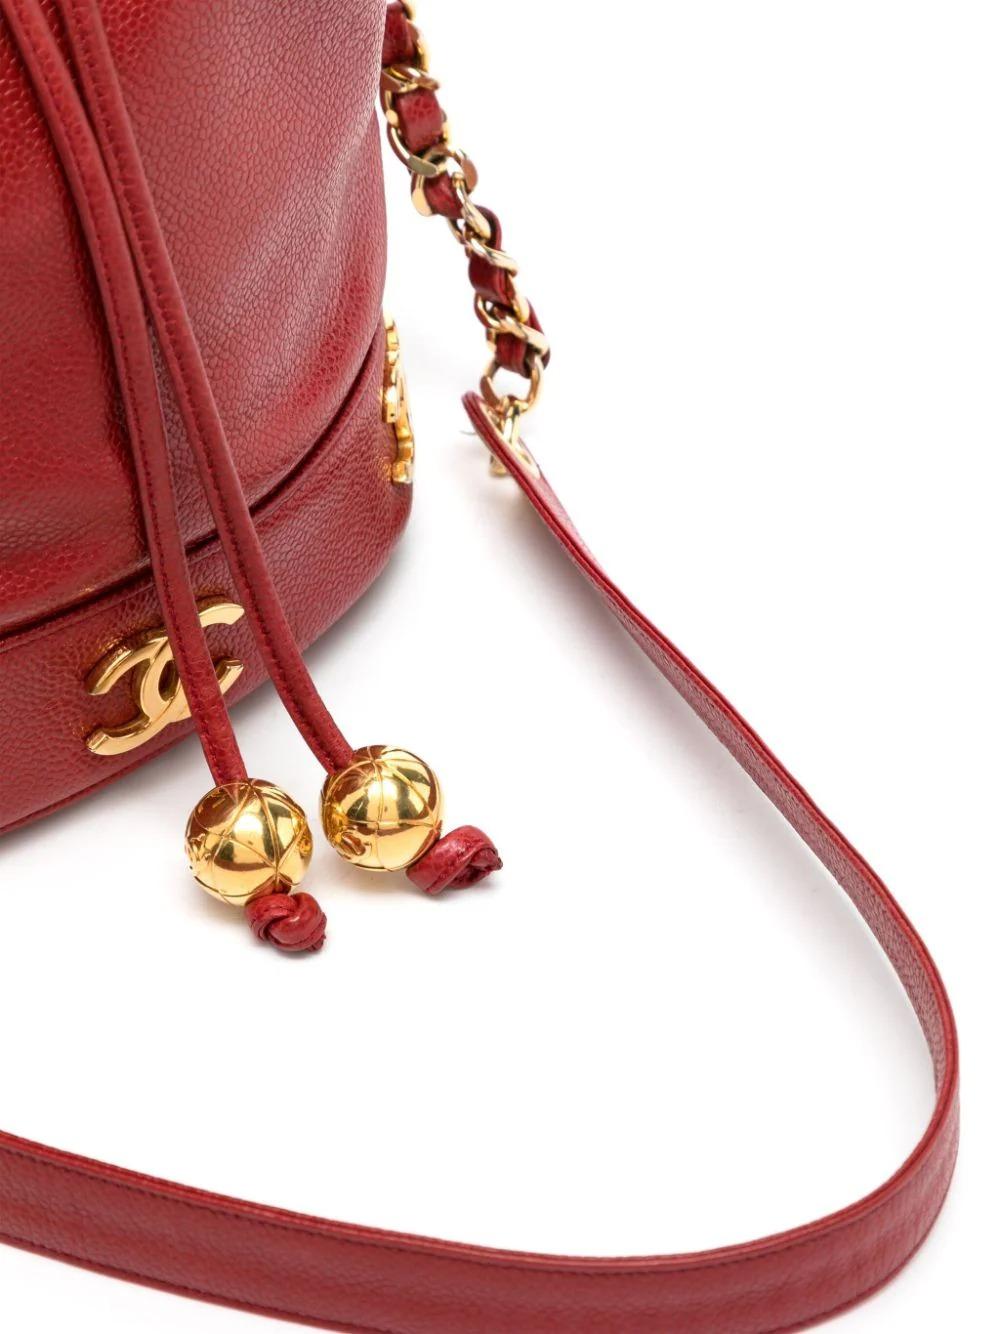 Chanel 1992 Red Caviar Plaque Bucket Drawstring Tote Crossbody Bag For Sale 4